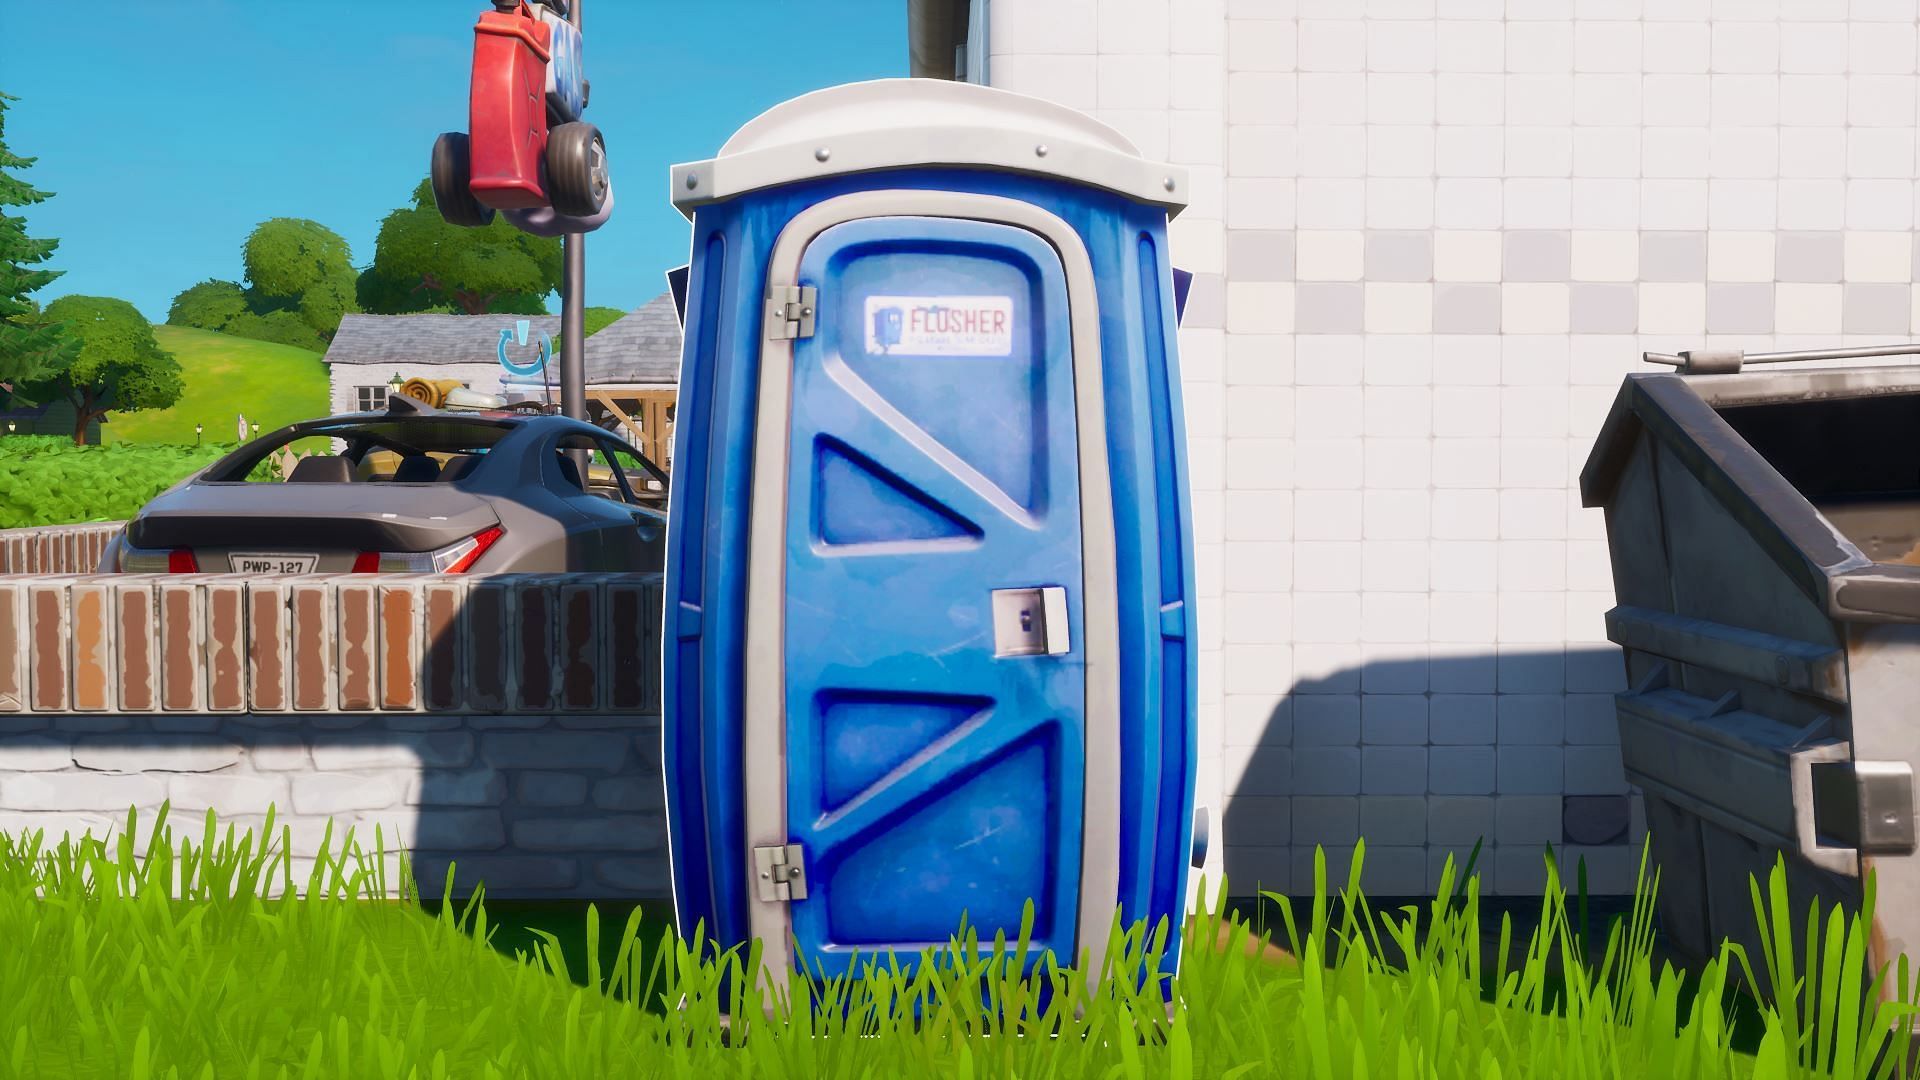 Hiding in a Dumpster and Flusher in Fortnite (Image via Epic Games)